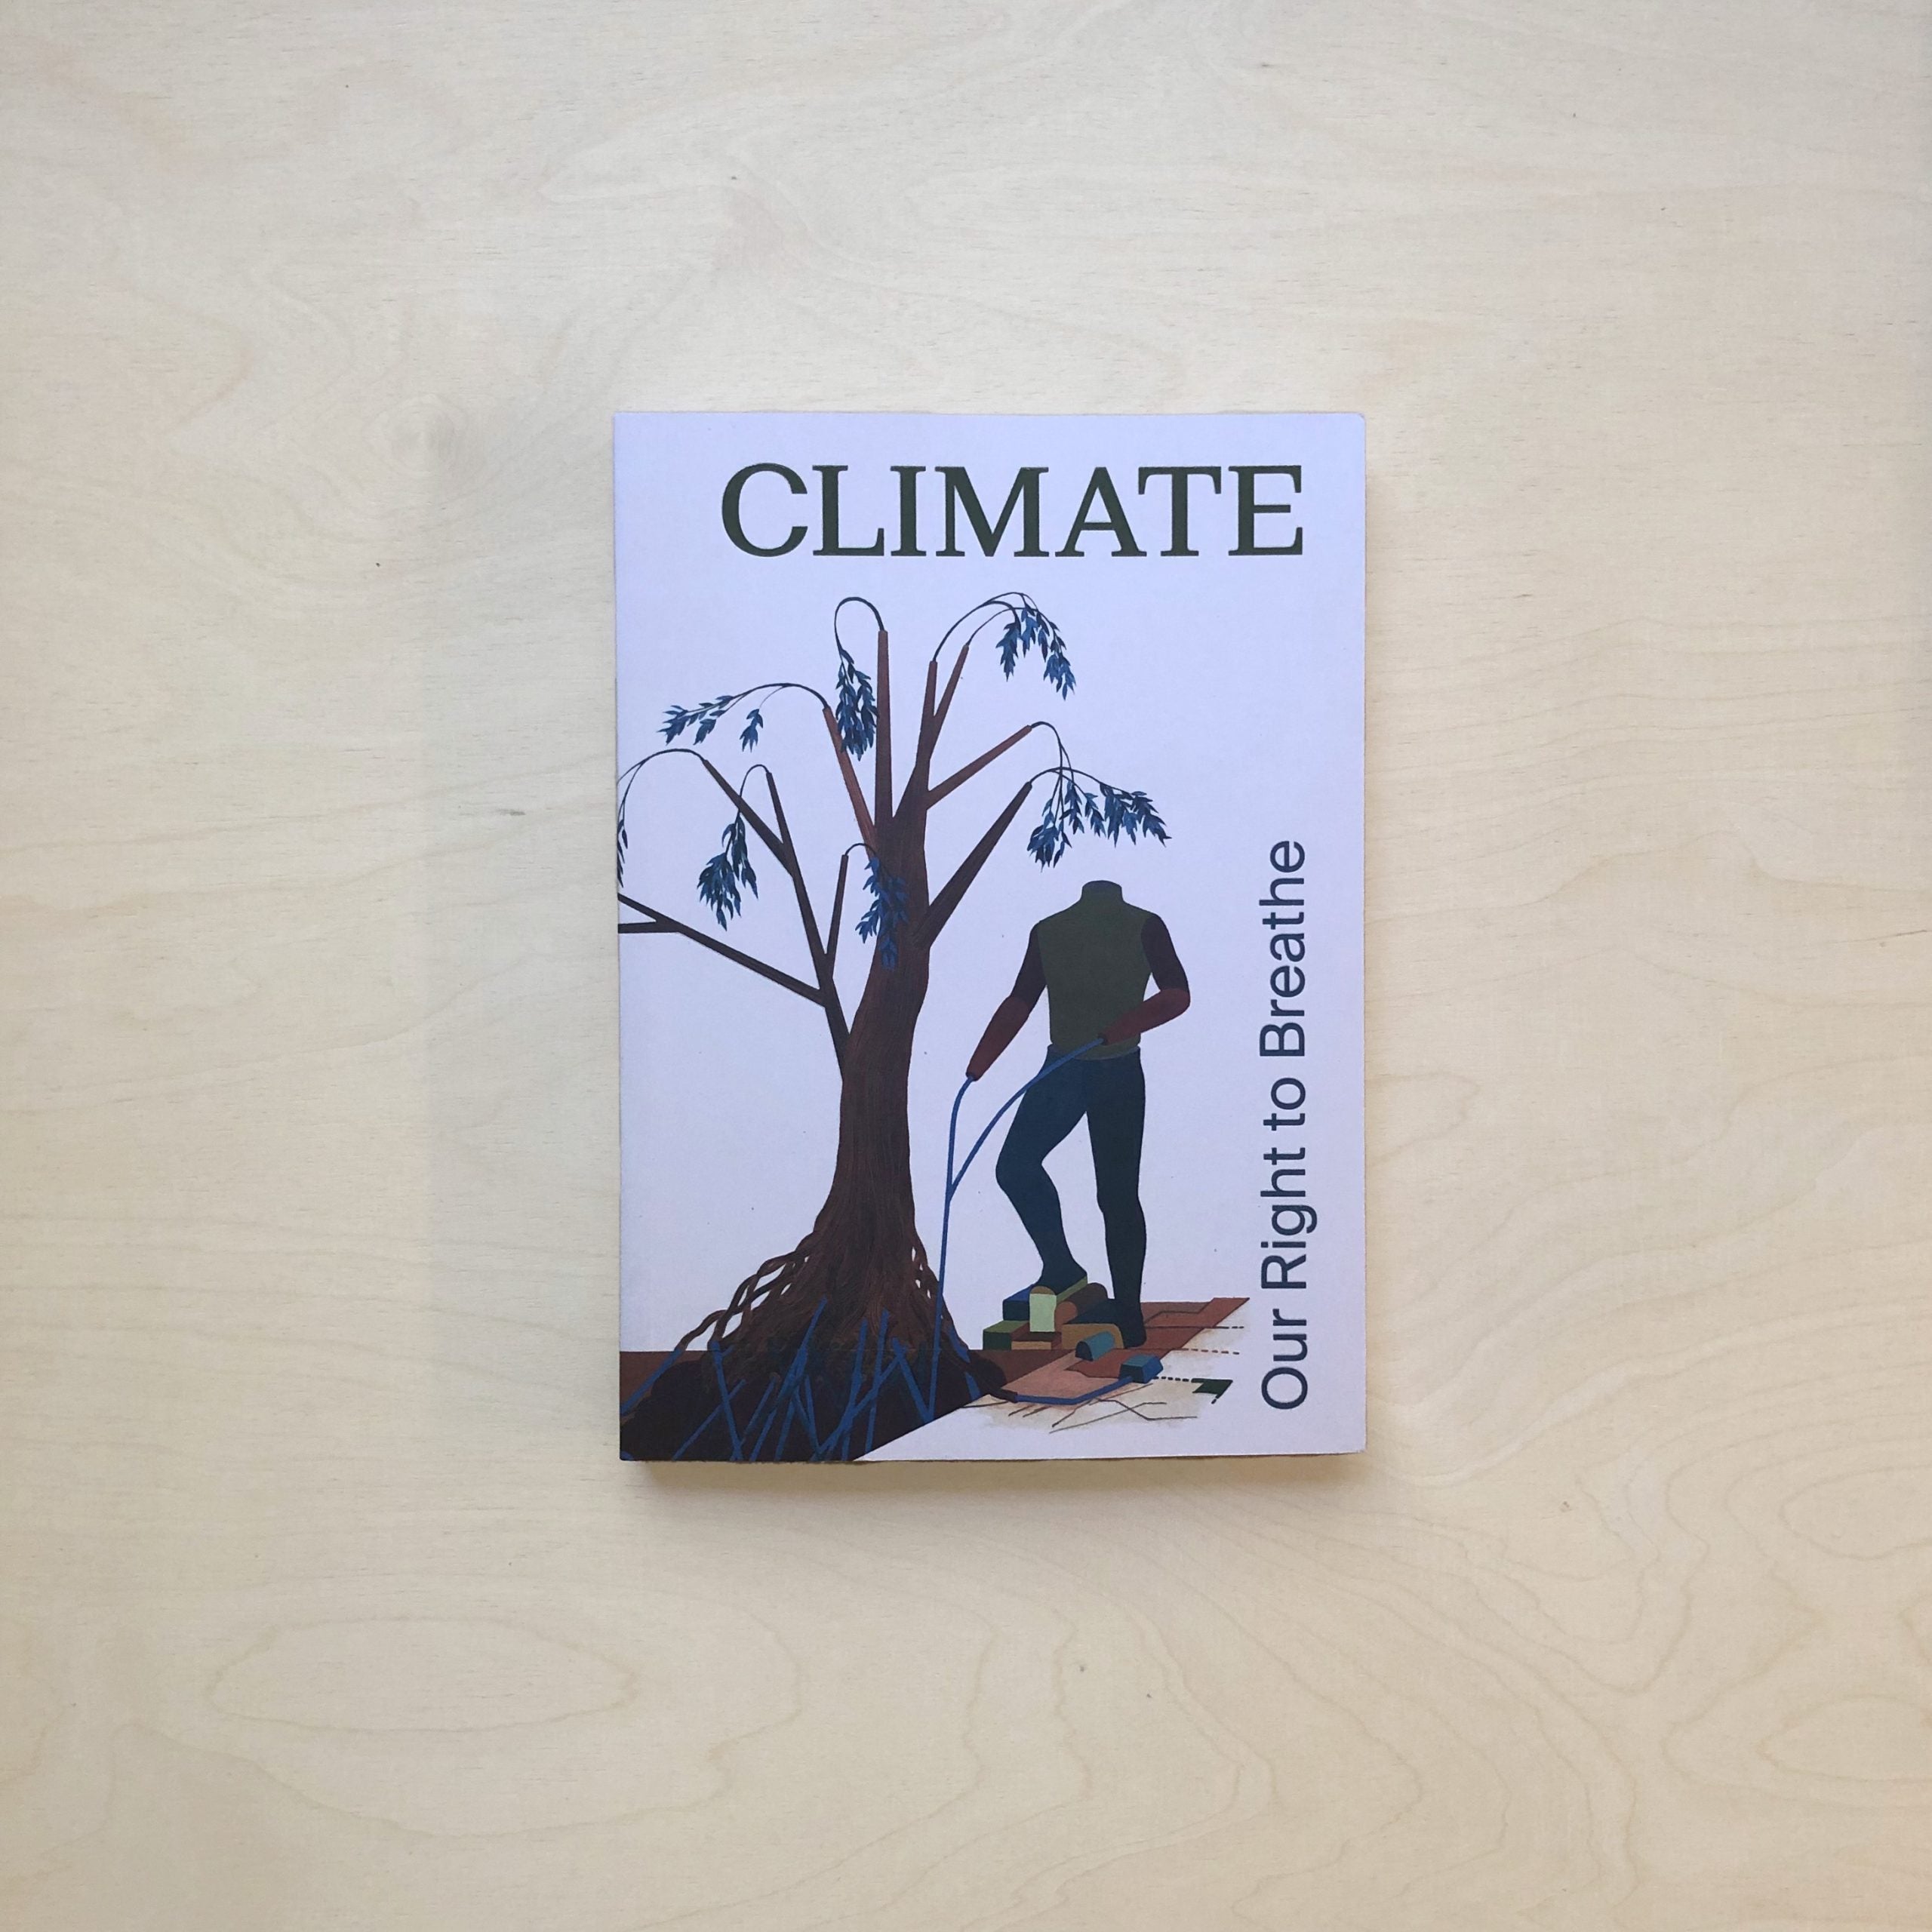 Publication: CLIMATE: OUR RIGHT TO BREATHE